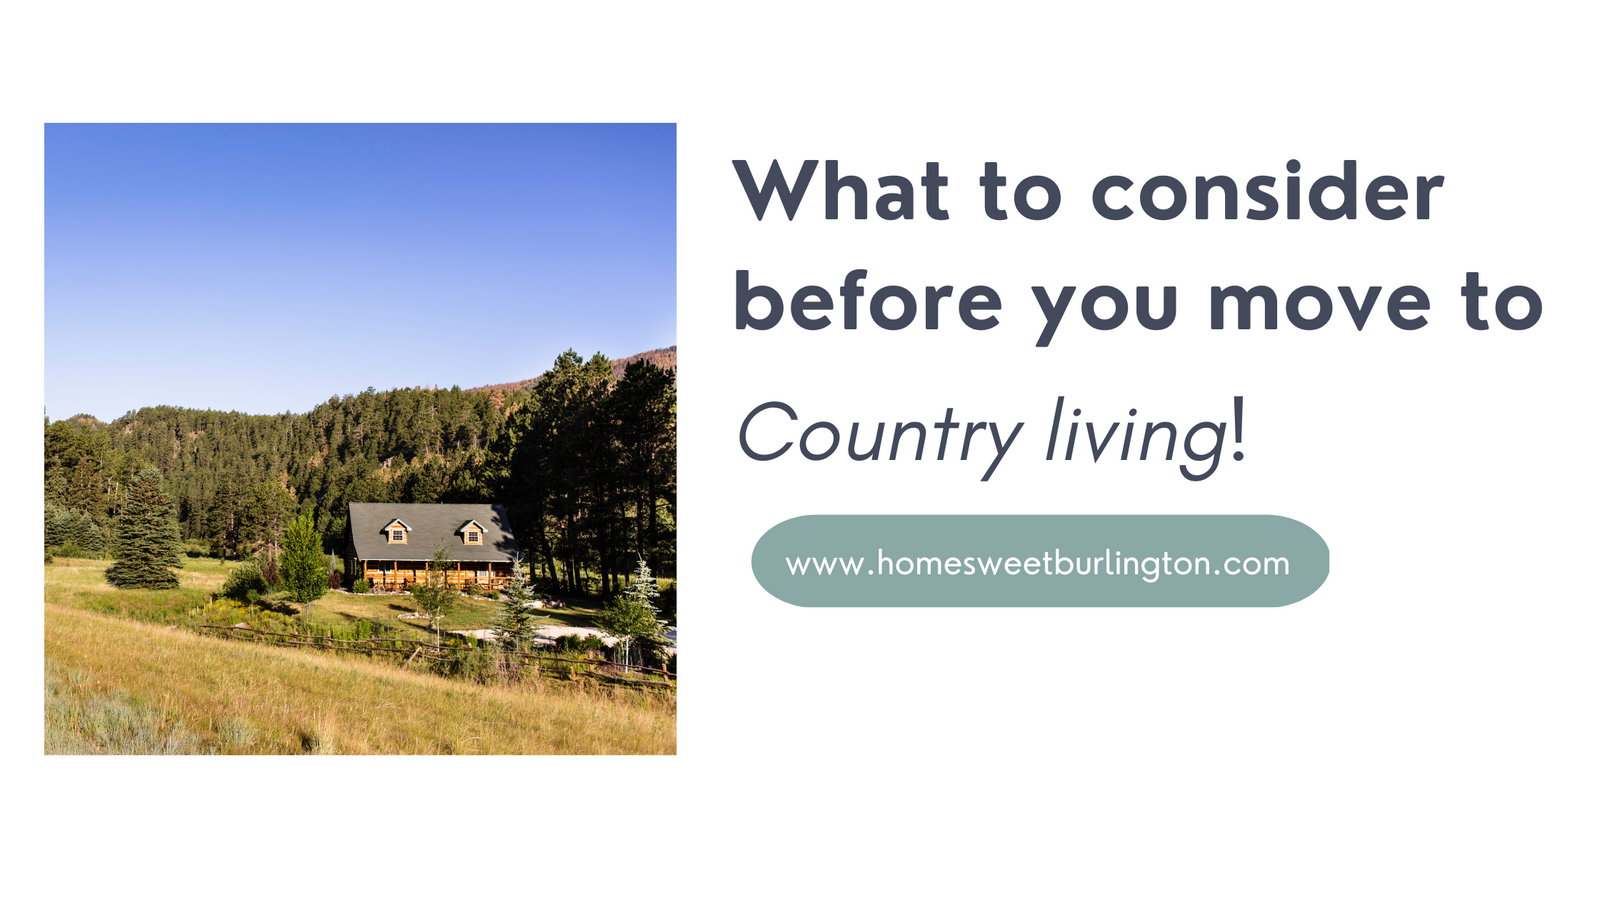 What to consider before moving to the country 